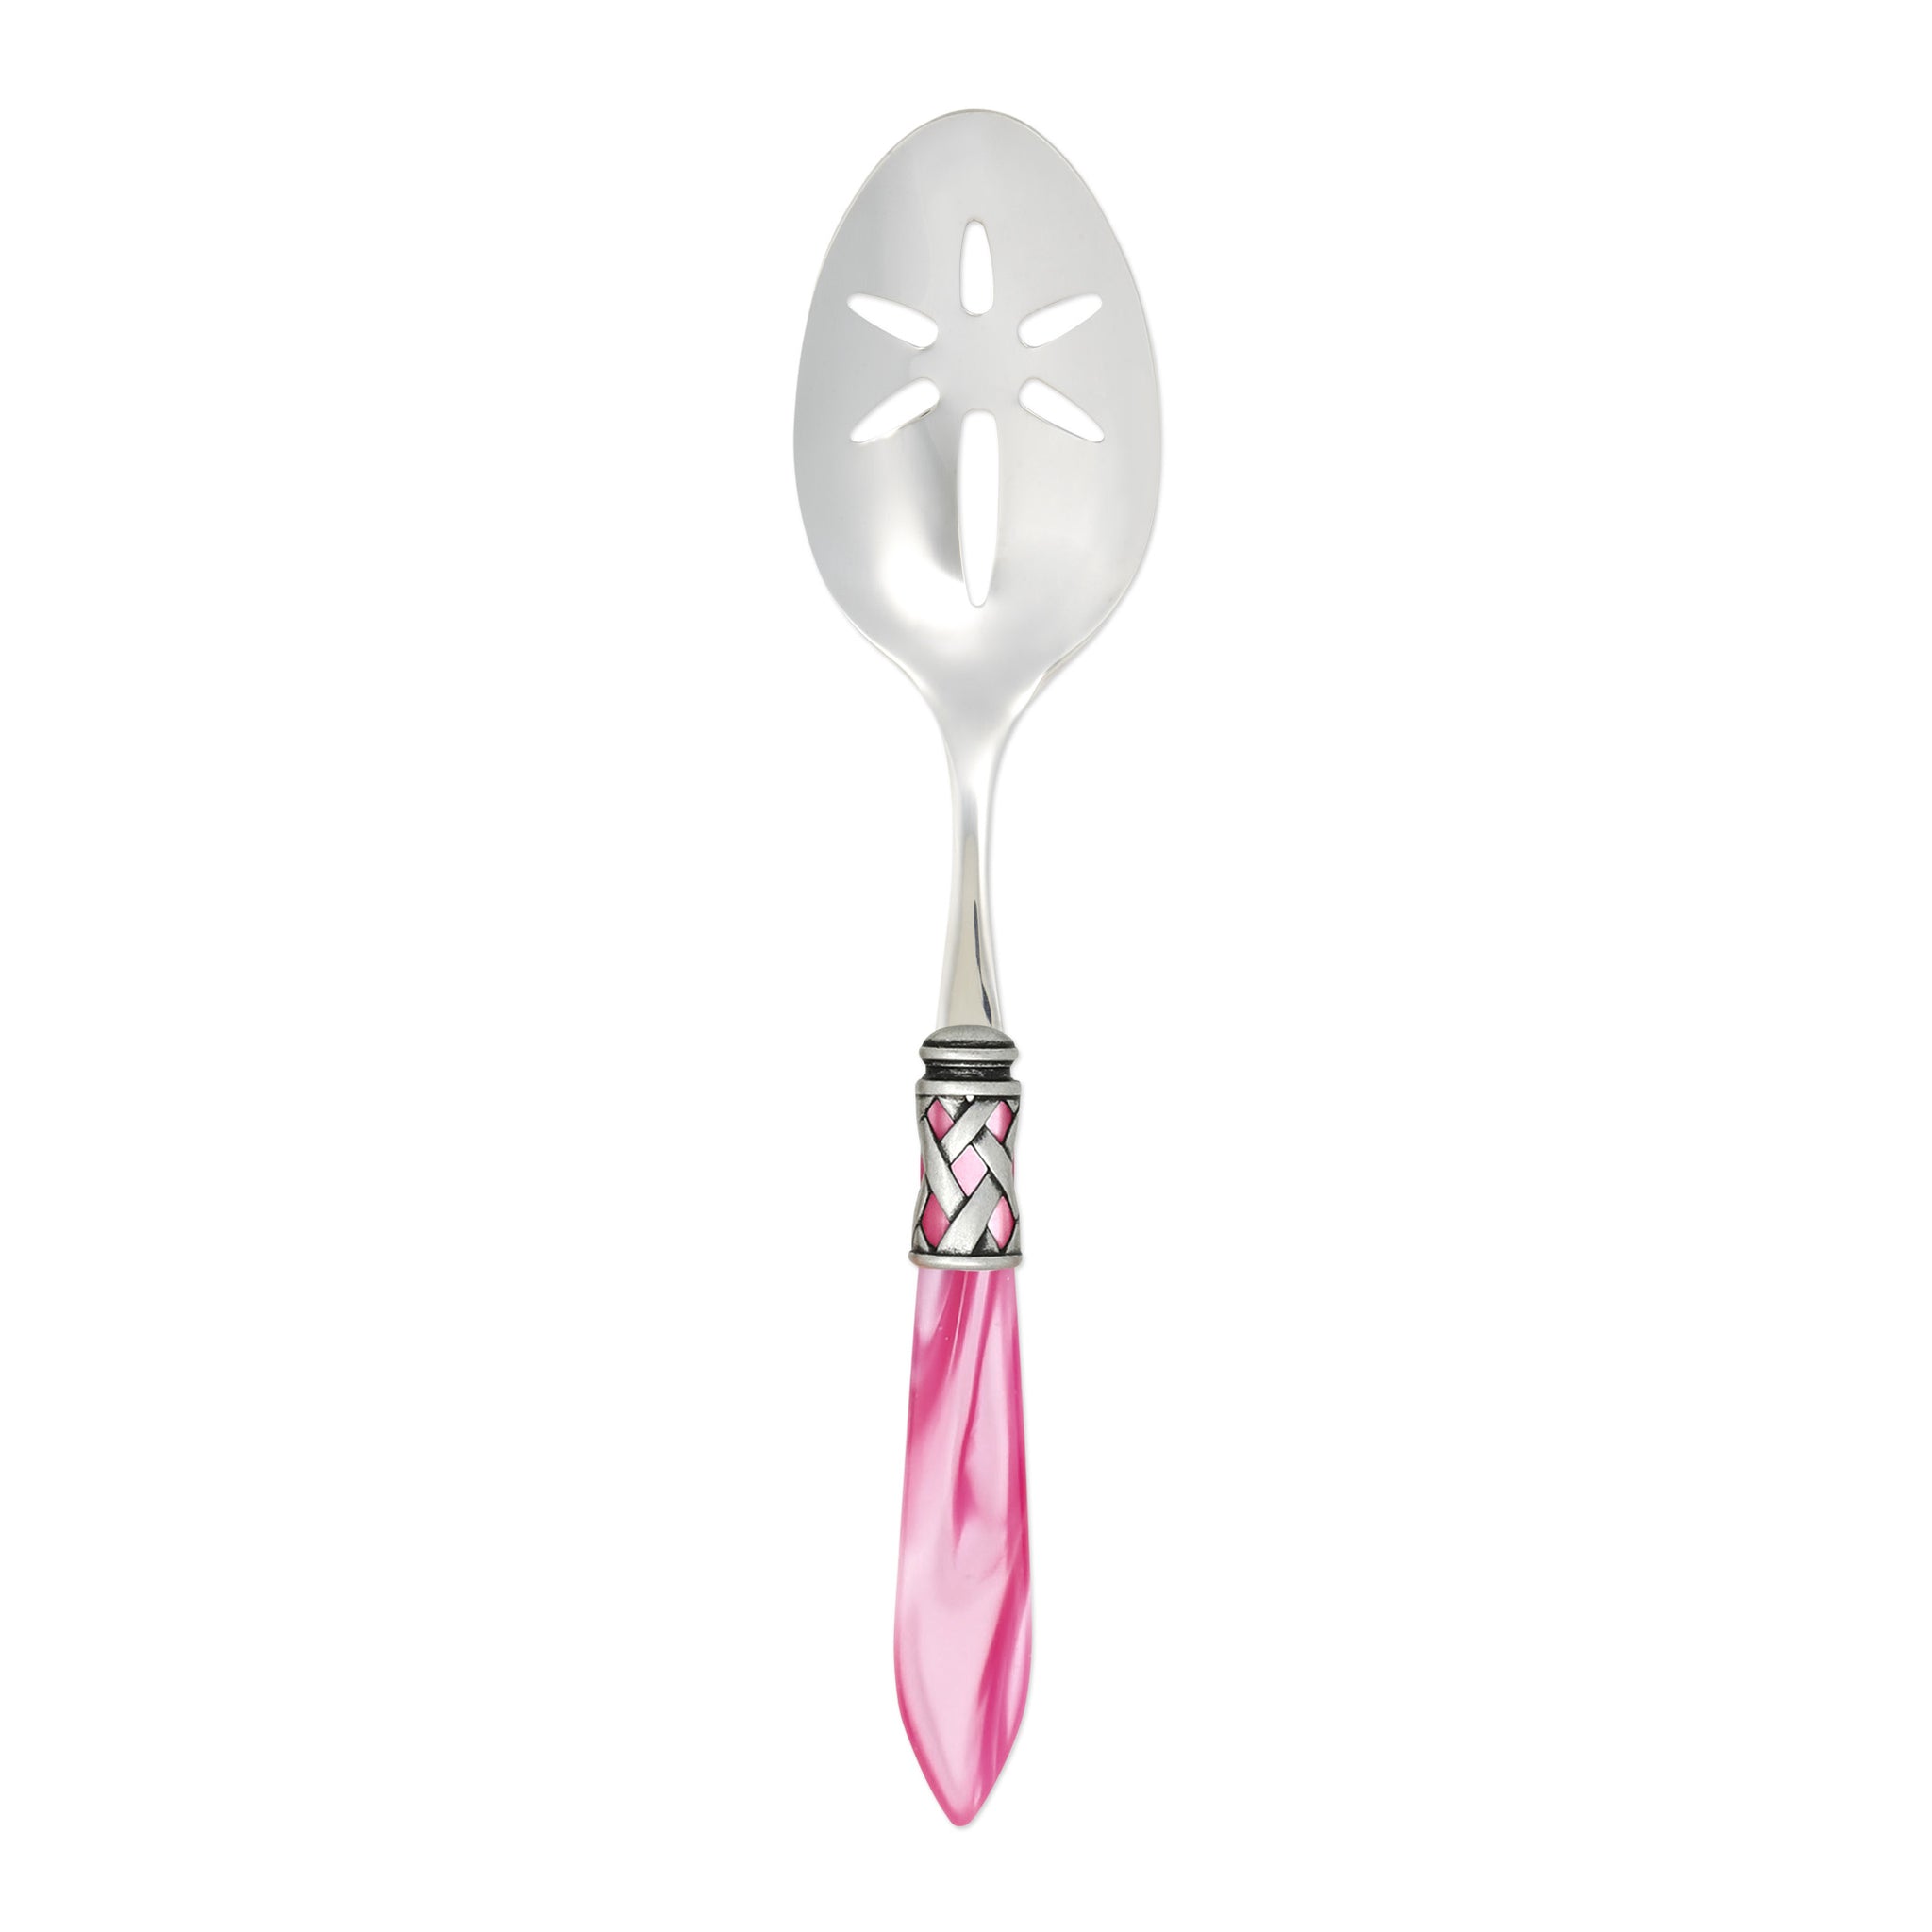 Aladdin Slotted Serving Spoon Antique - Light Pink